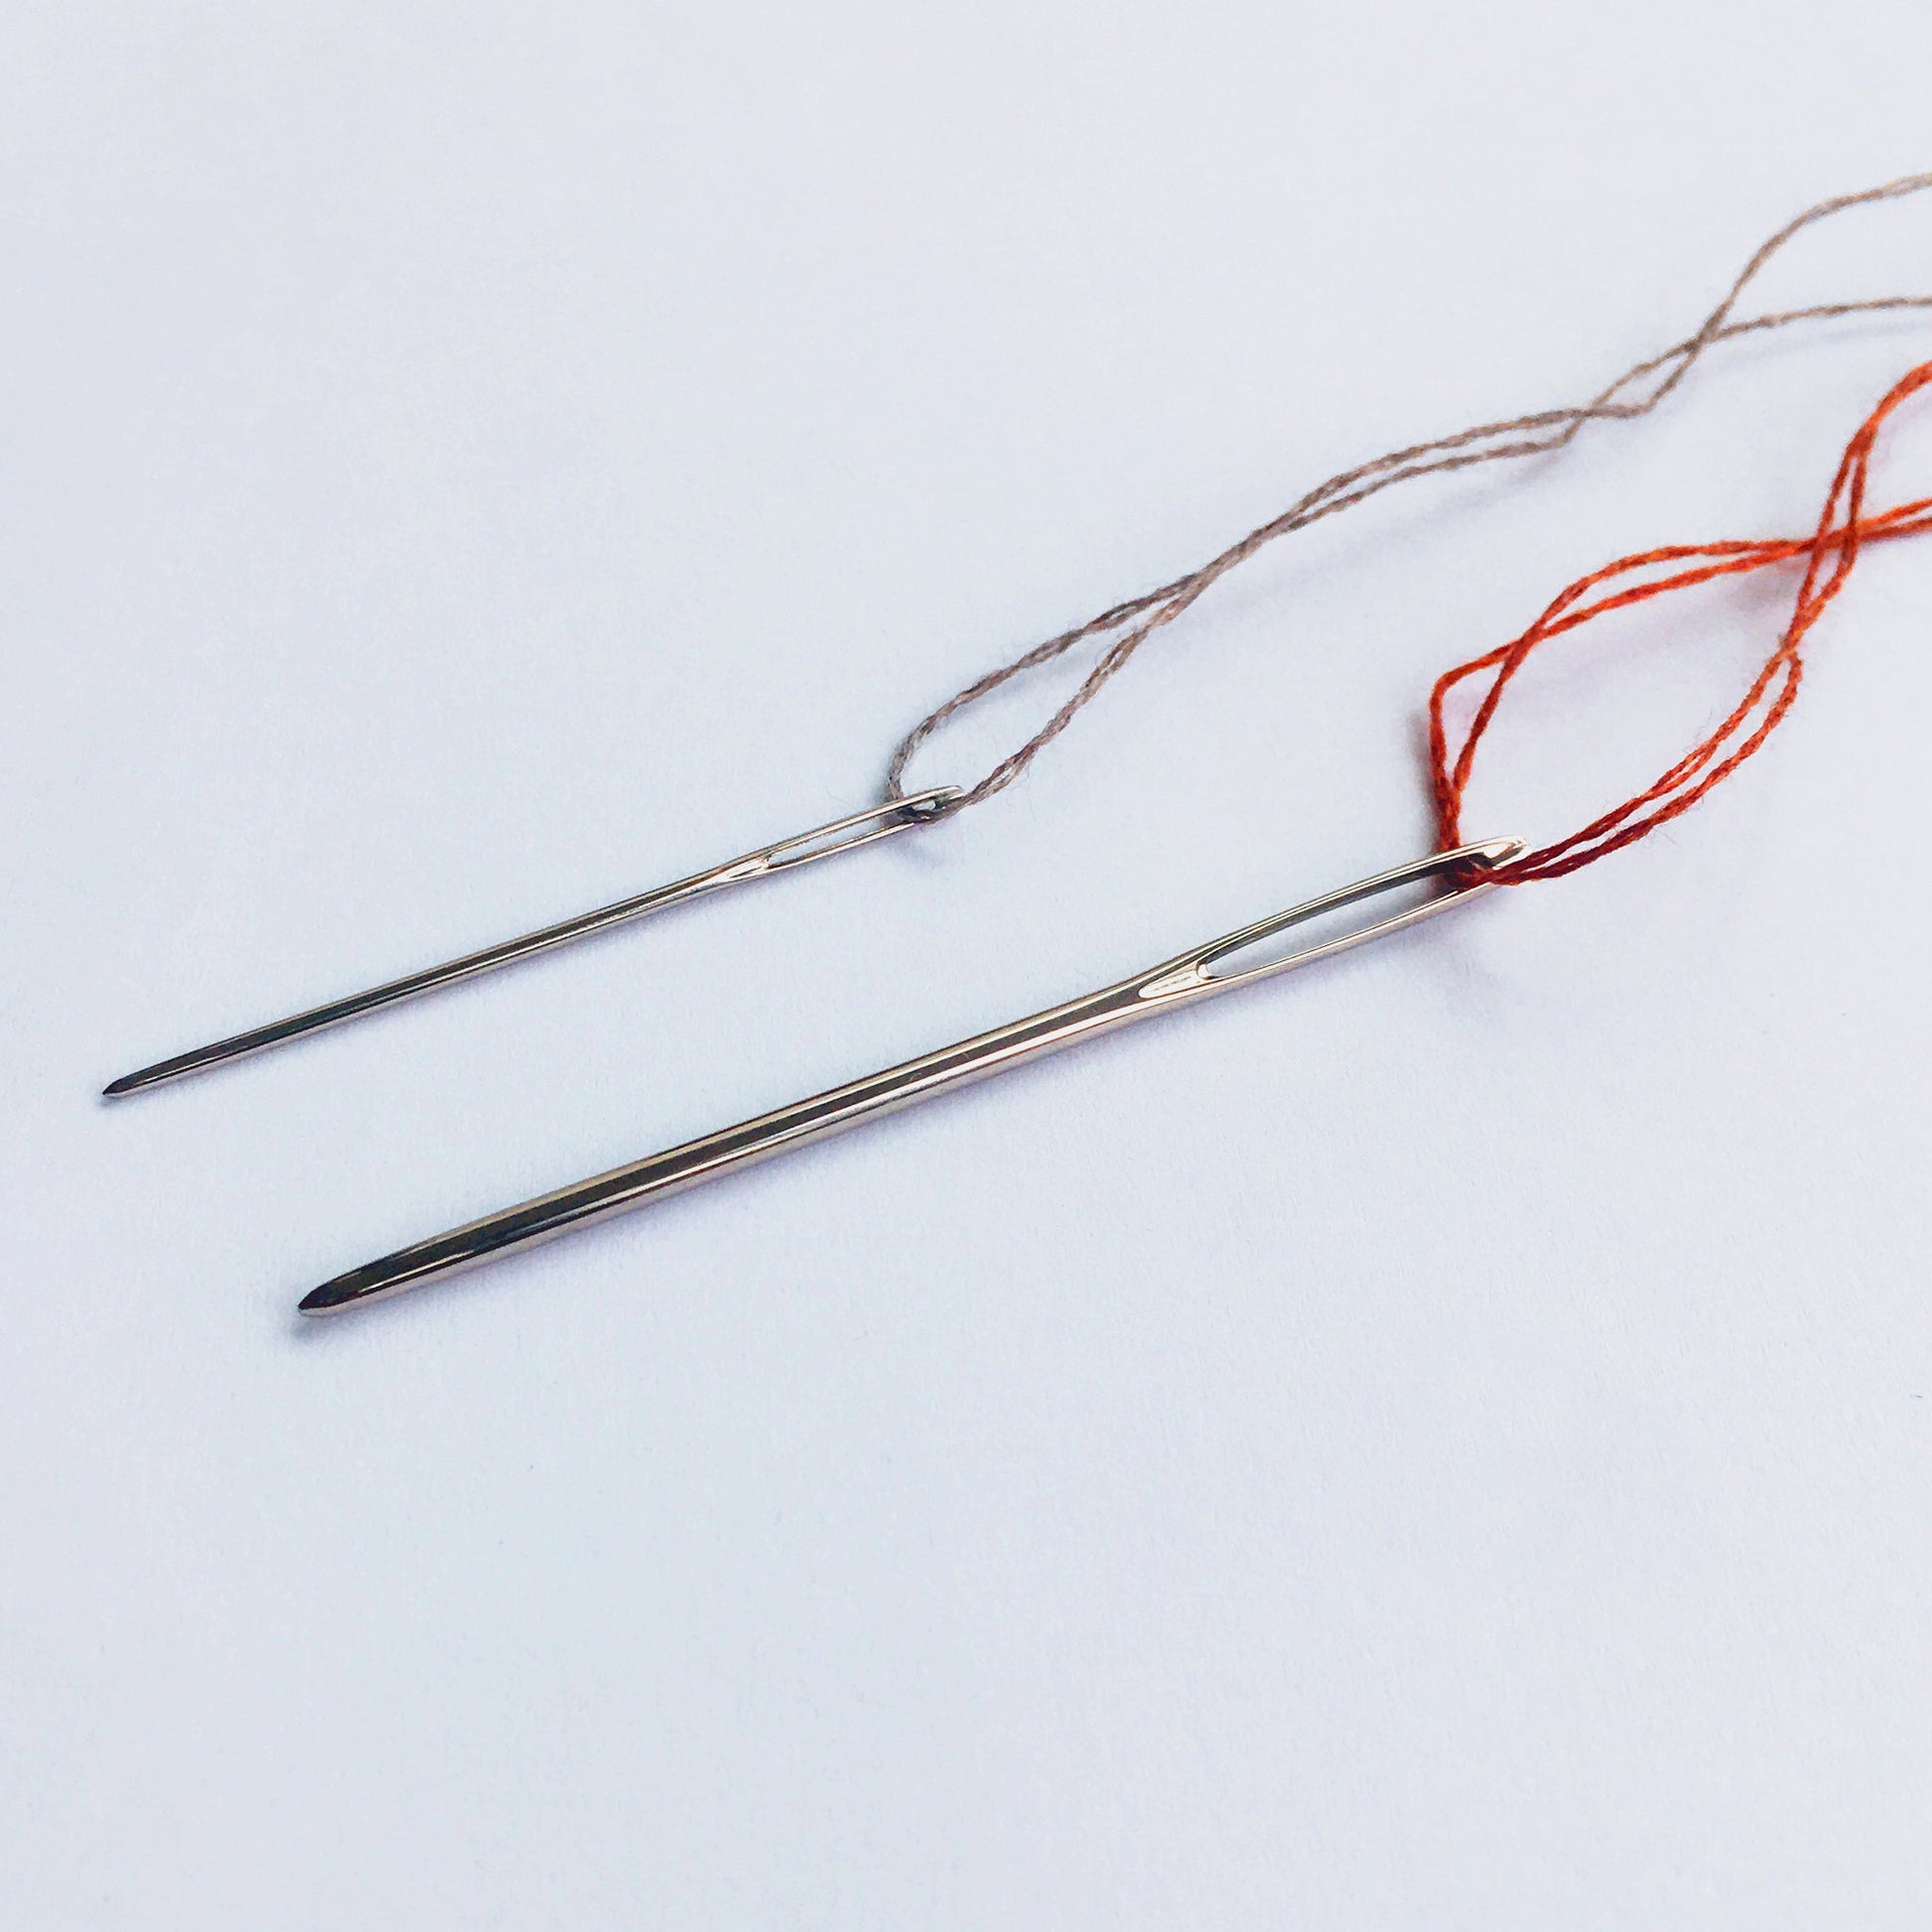 2 Darning needles in 2 sizes. Round tip knitter's needles. Perfect for darning with wool darning yarns.